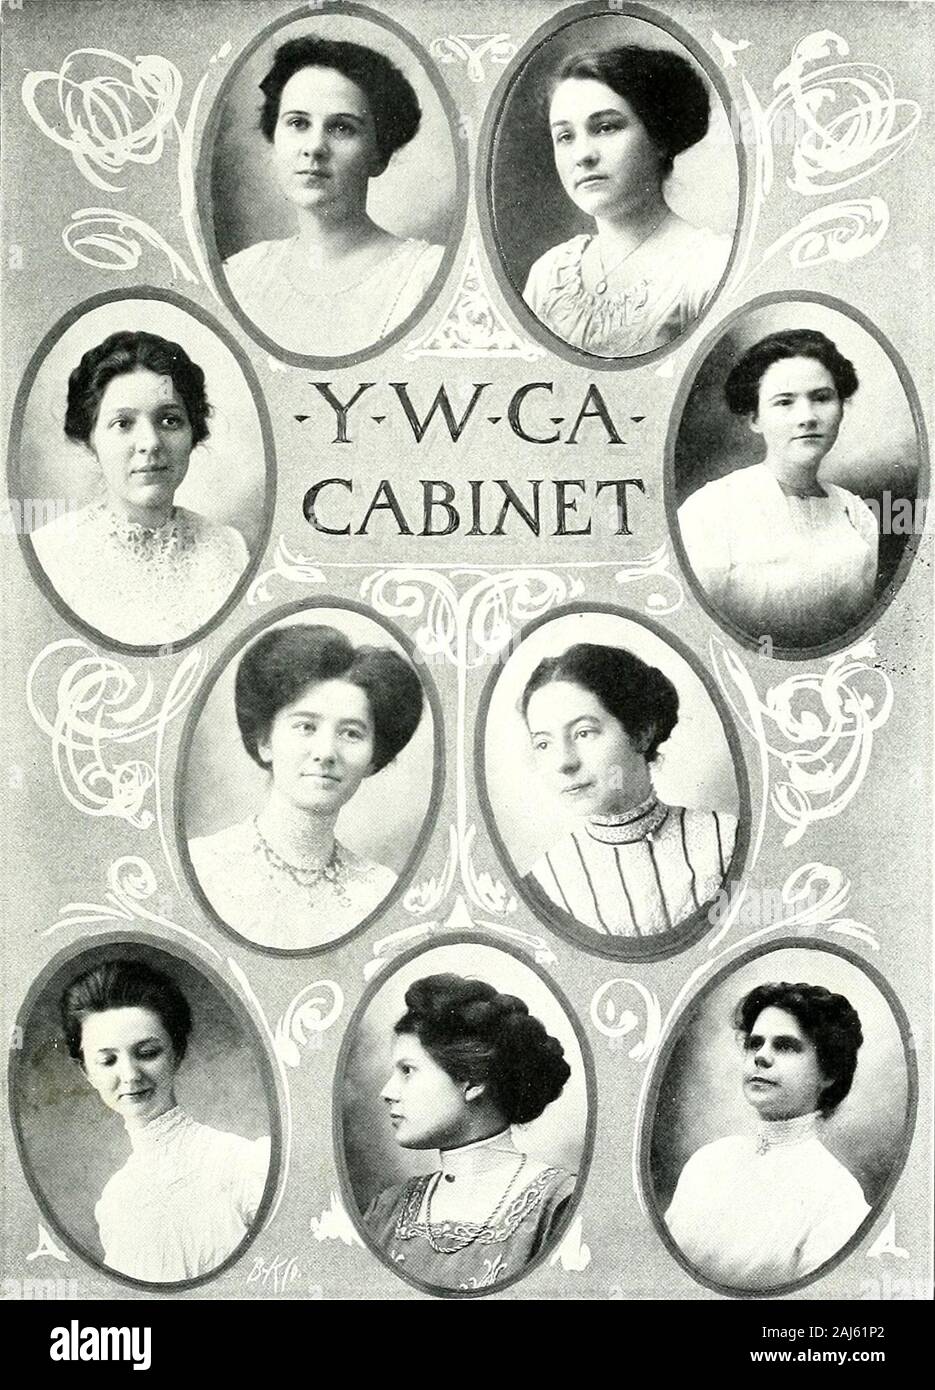 Chiaroscuro . Y. VV. C. A. CABINET Motto: Not by might, nor by power, but by my spirit, saith the LordHosts. Frances Y. S.rrr:i General Secretary. Edith Patterson President. Ethel Housee Vice-President. Winnie Davis Neely Secretary. Eii.ette 1 rker Treasurer. CHAIRMEN OF .COMMITTEES Sallie Sellers Missionary. Ethel IIouser Devotional. Mamie Ross Finance. ELvttie Stabler Membership. Virginia McWhorter Social. Arlene Fitzgerald Inter-Collegiate. ( orinne Neely I tible Study. Frances Y. Smith Secretary. ss. CASTALIAN LITERARY SOCIETY. Flower.—Daisy.Colors.—White and gold.Motto.—Ad. Astra per As Stock Photo